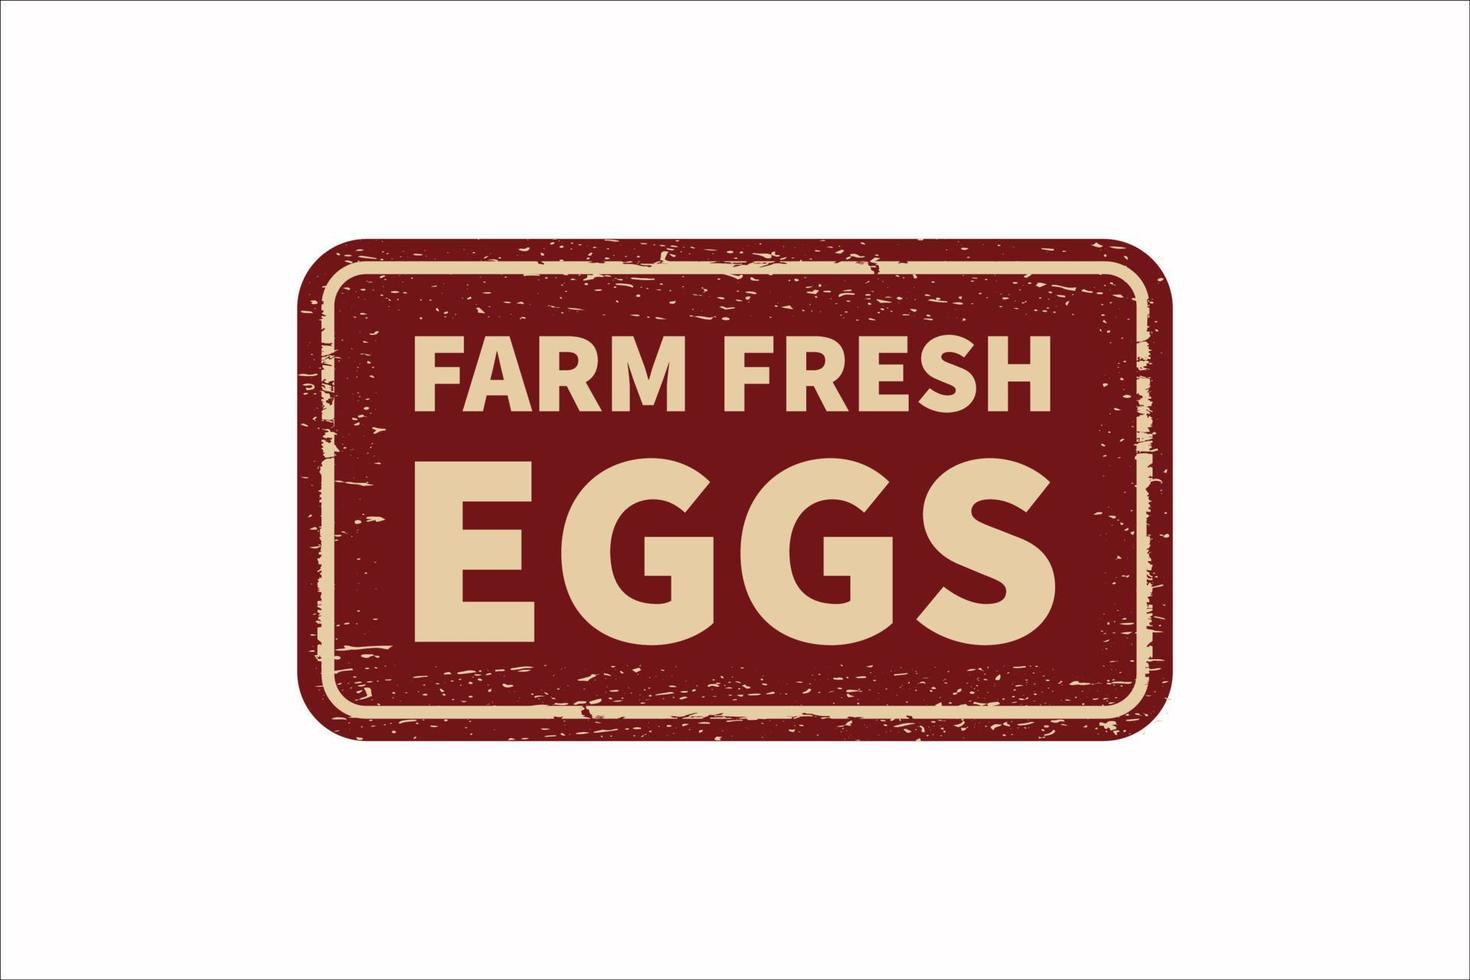 Farm fresh eggs on red vintage rusty metal sign on a white background, vector illustration